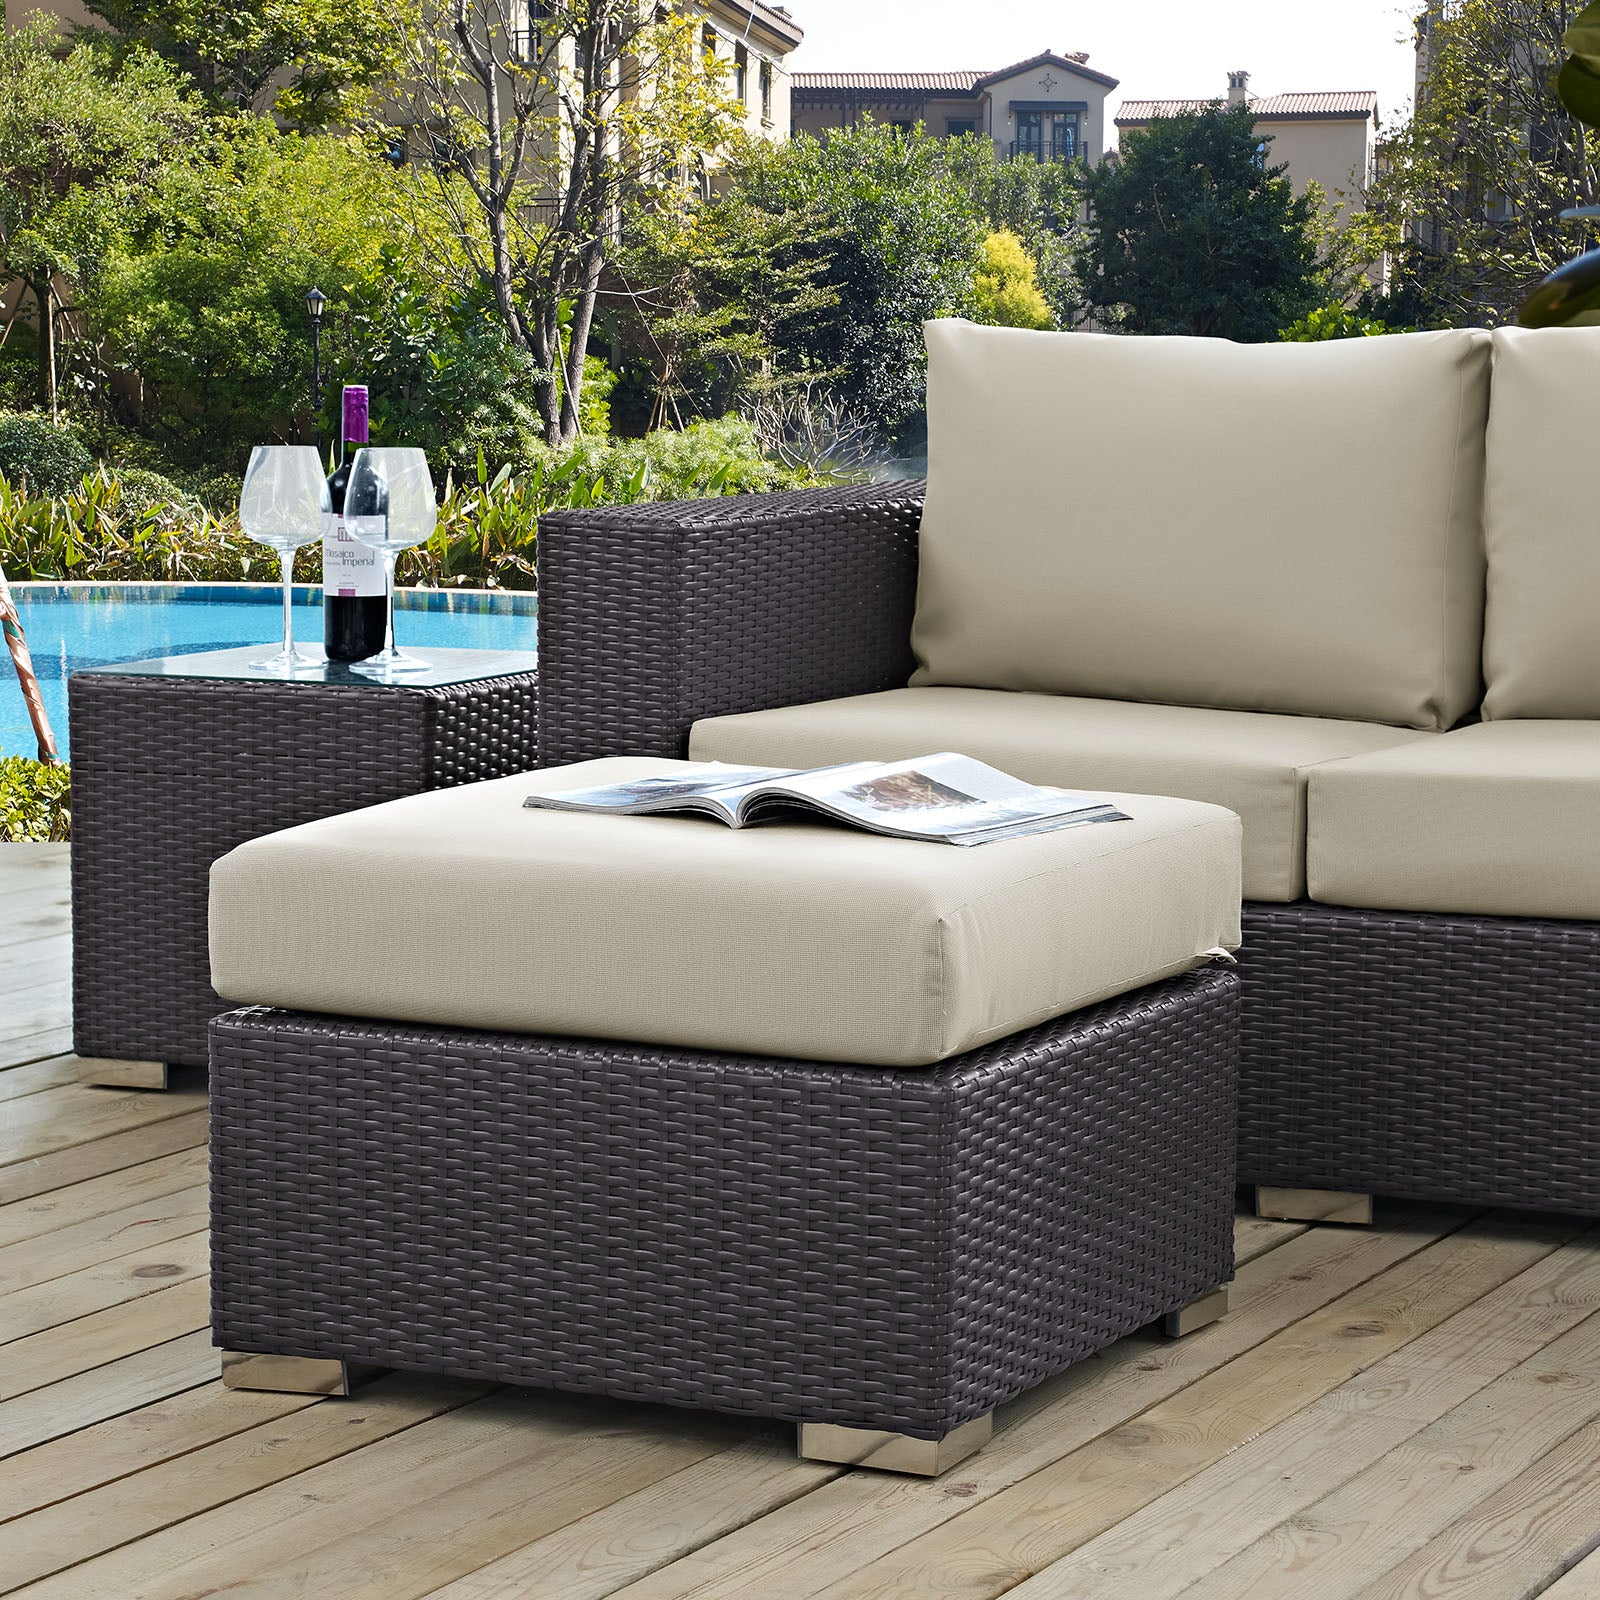 Modway Outdoor Stools & Benches - Convene Outdoor Patio Fabric Square Ottoman Espresso Beige